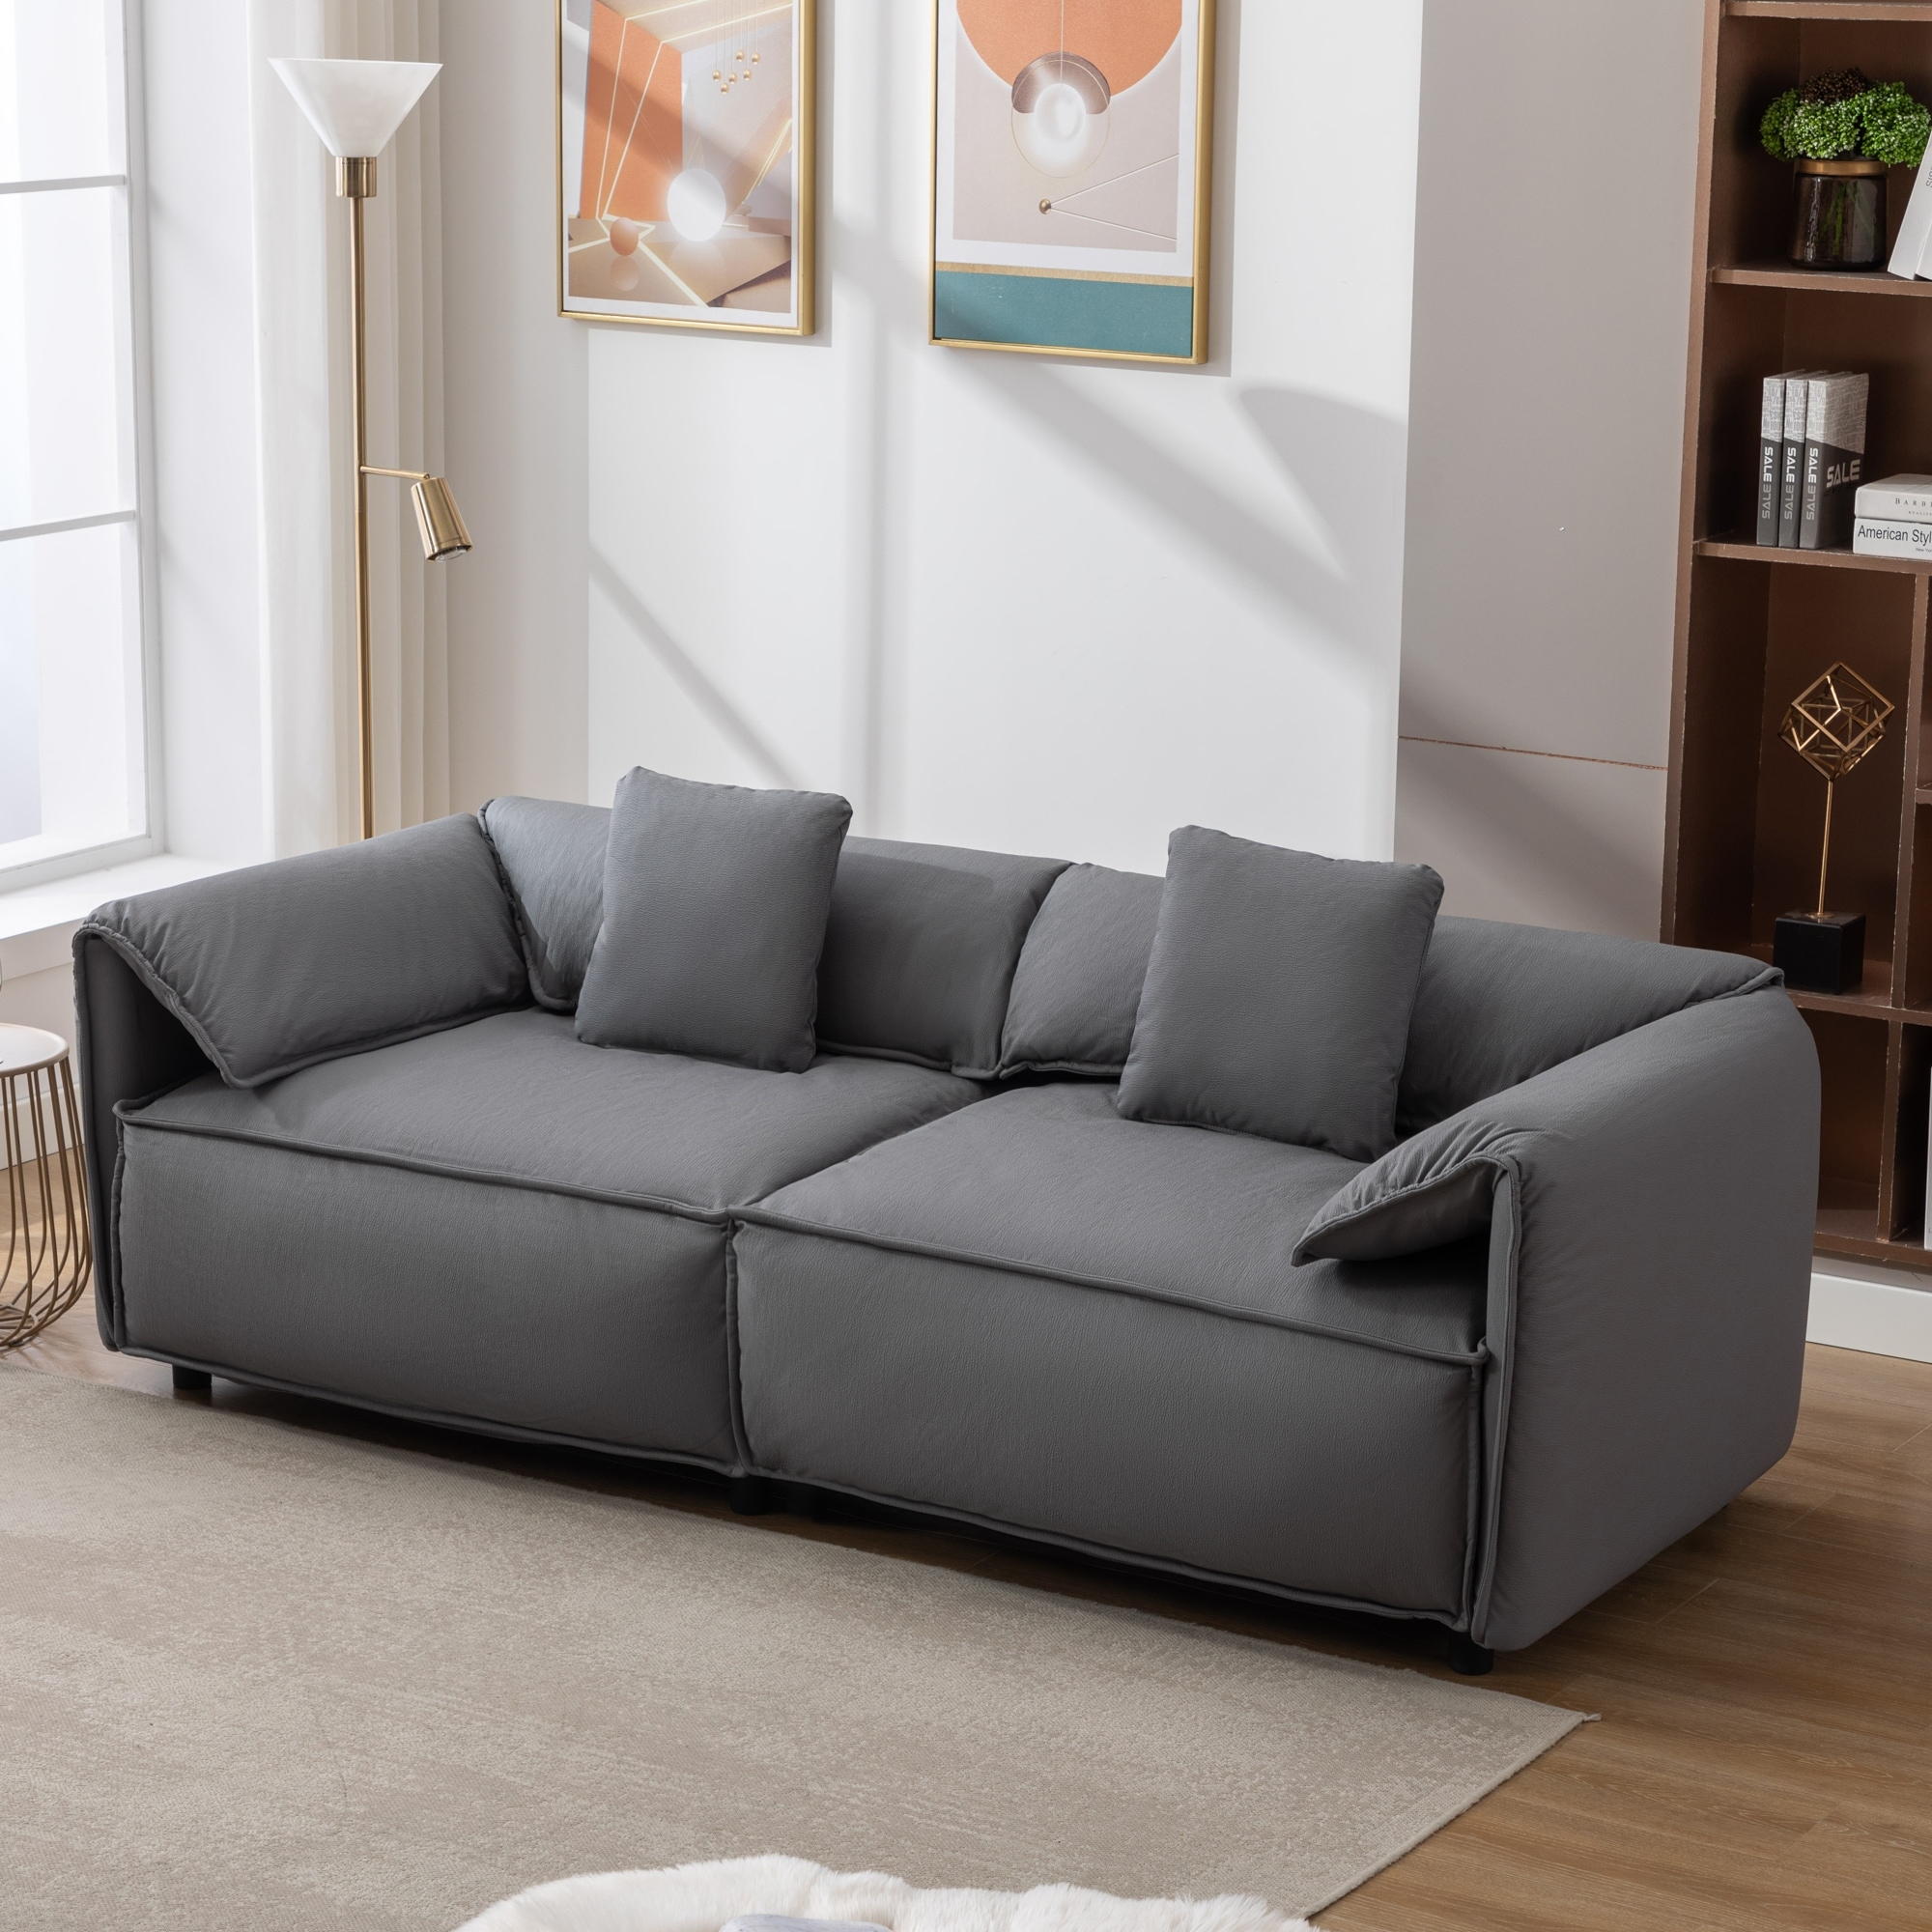 https://ak1.ostkcdn.com/images/products/is/images/direct/cf67493119d8a50f73680bded0c573c06378977f/Luxury-Modern-Sofa-Living-Room-3-Seat-Sofa-with-2-Pillows%2C-90.6-inch-Comfortable-Backrest-3-Seat-Sofa-for-Bedroom%2C-Apartment.jpg